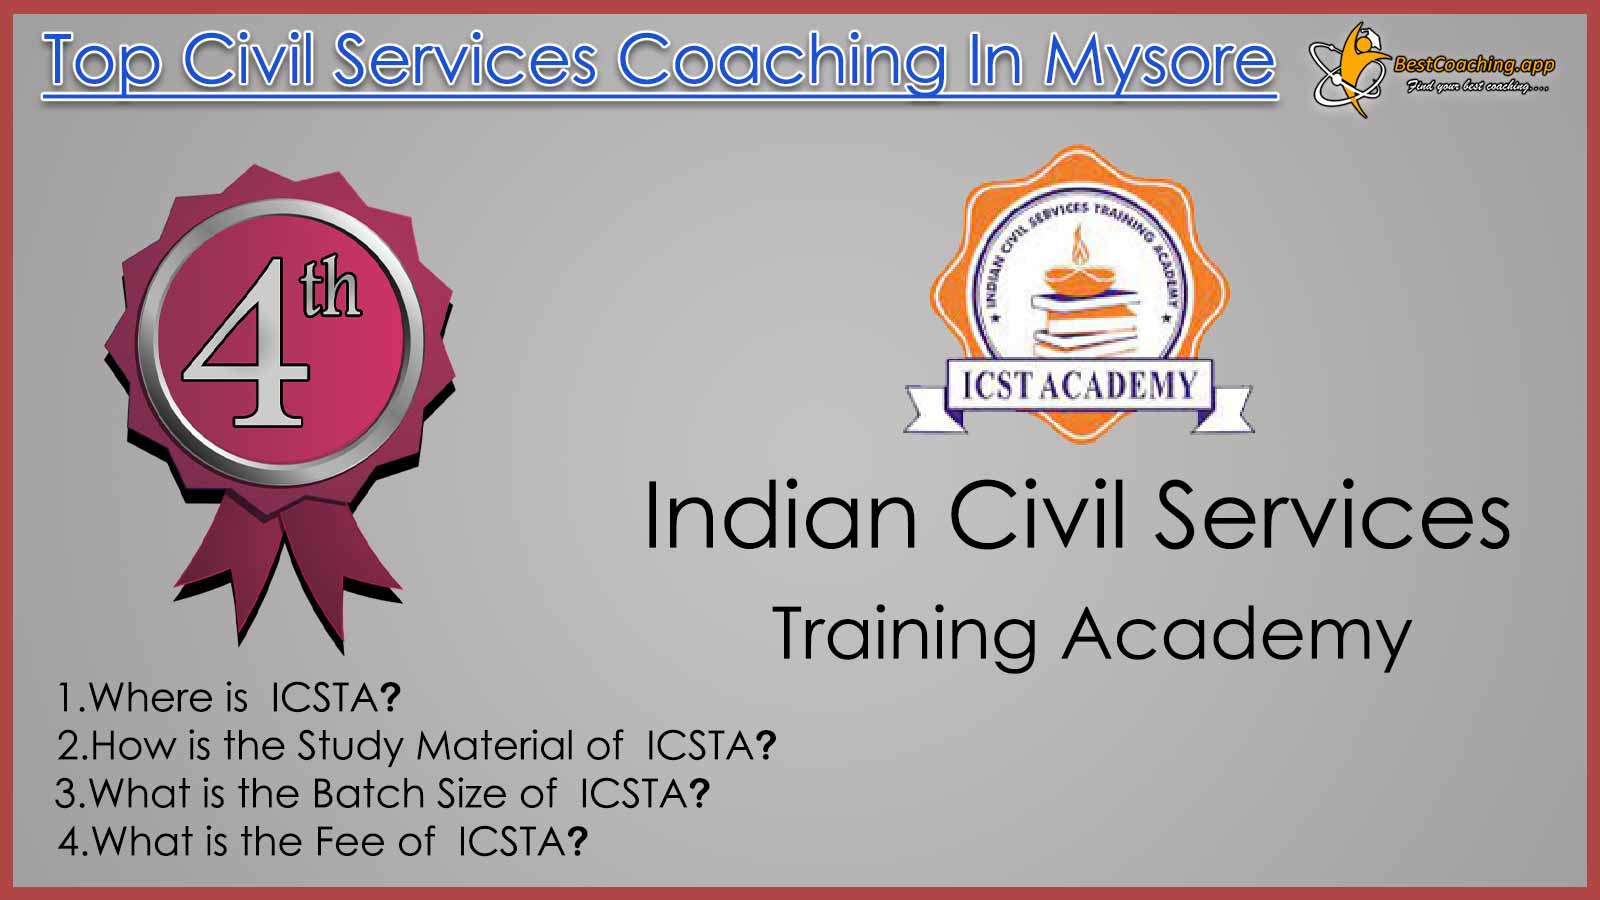 Indian civil Services Training Academy Coaching Centre